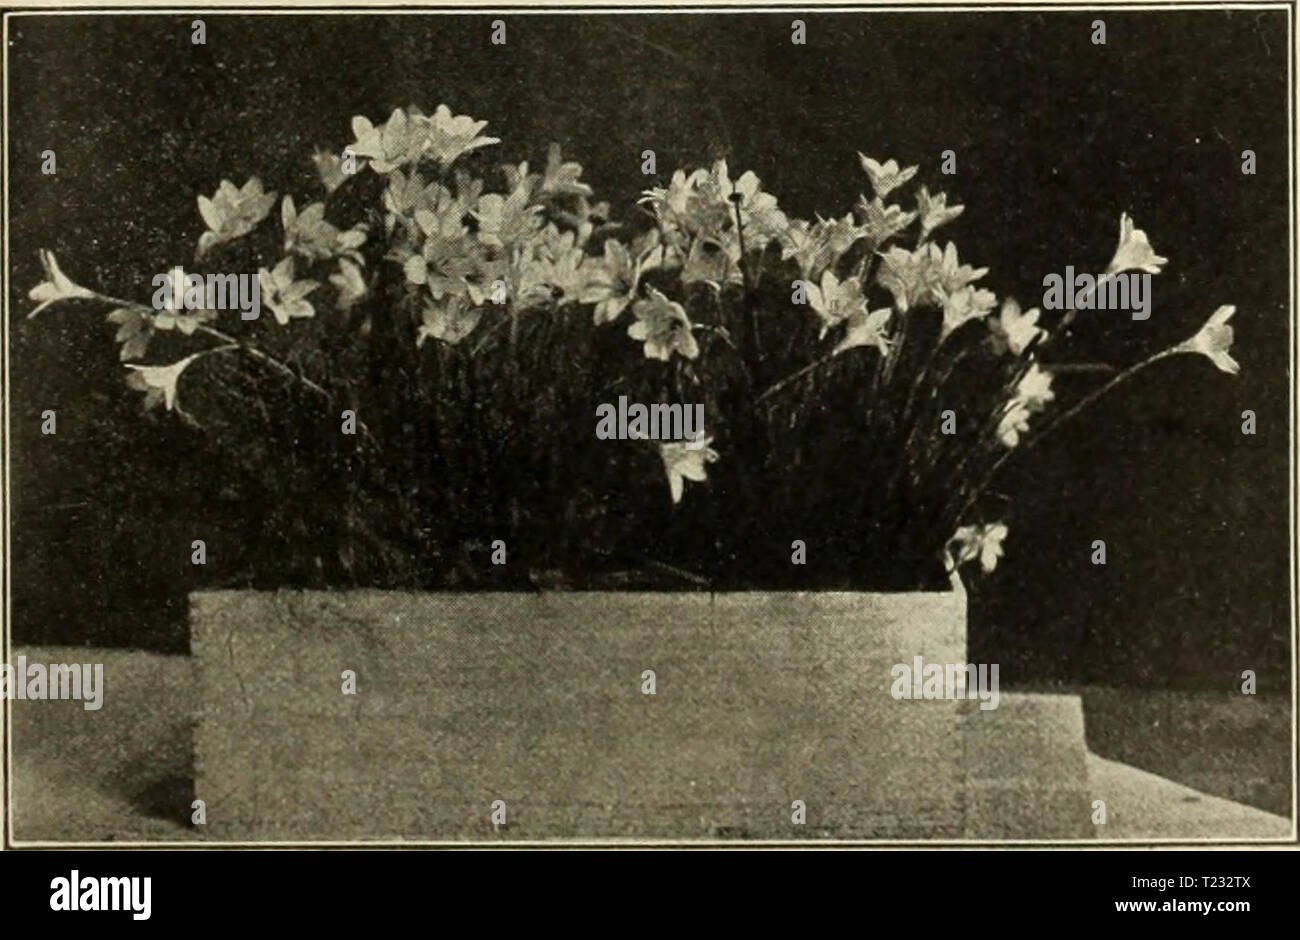 Archive image from page 84 of Dingee guide to rose culture Dingee guide to rose culture : 1917  dingeeguidetoros19ding 8 Year: 1917  Maiden Hair Fern. M.AIDE'NH.AIR 1-'ERN (Adiantum cuneatum)—The best known table Fern, with dainty, lacy fronds, unlike any other. 15c and 25c each, postpaid. ALTERN.ANTHER.S—-Compact bedder. Two colors, red and yel- low variegated. 10c each, any 6 for 50c; any 15 for .$1.00. CISSl'S DISCOLOR (Trailing Begonia)—The leaves are long, heart-shaped, .and as hand.somely marbled and mottled as a Rex Begonia. For hanging baskets. Strong plants, 1,5c each; 4 for .5&lt;)c Stock Photo